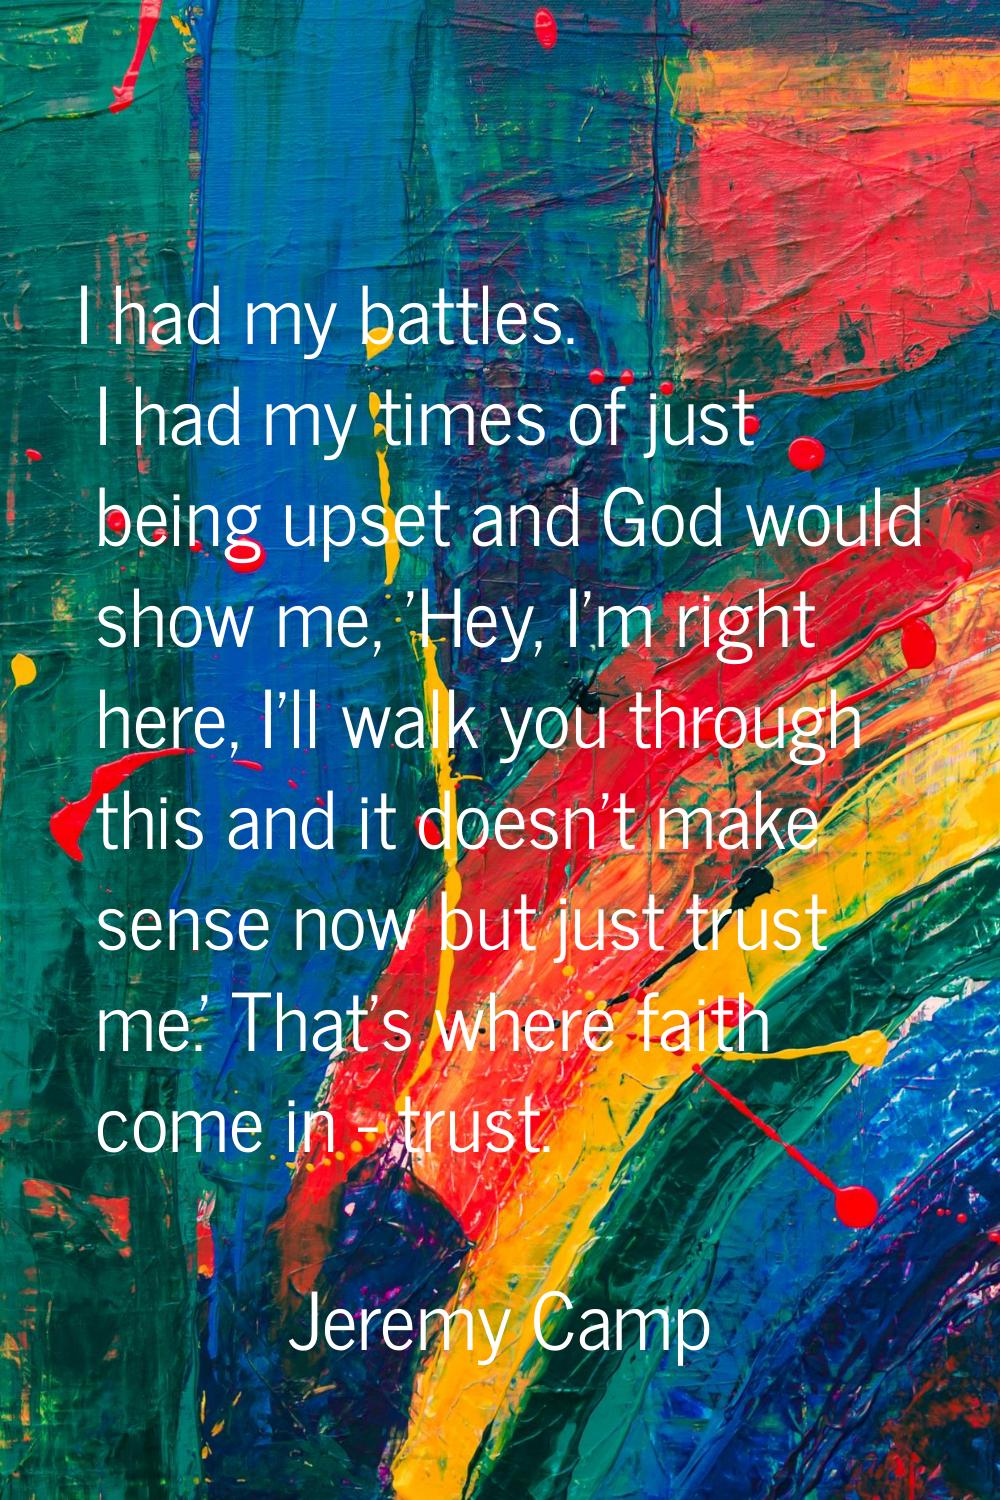 I had my battles. I had my times of just being upset and God would show me, 'Hey, I'm right here, I